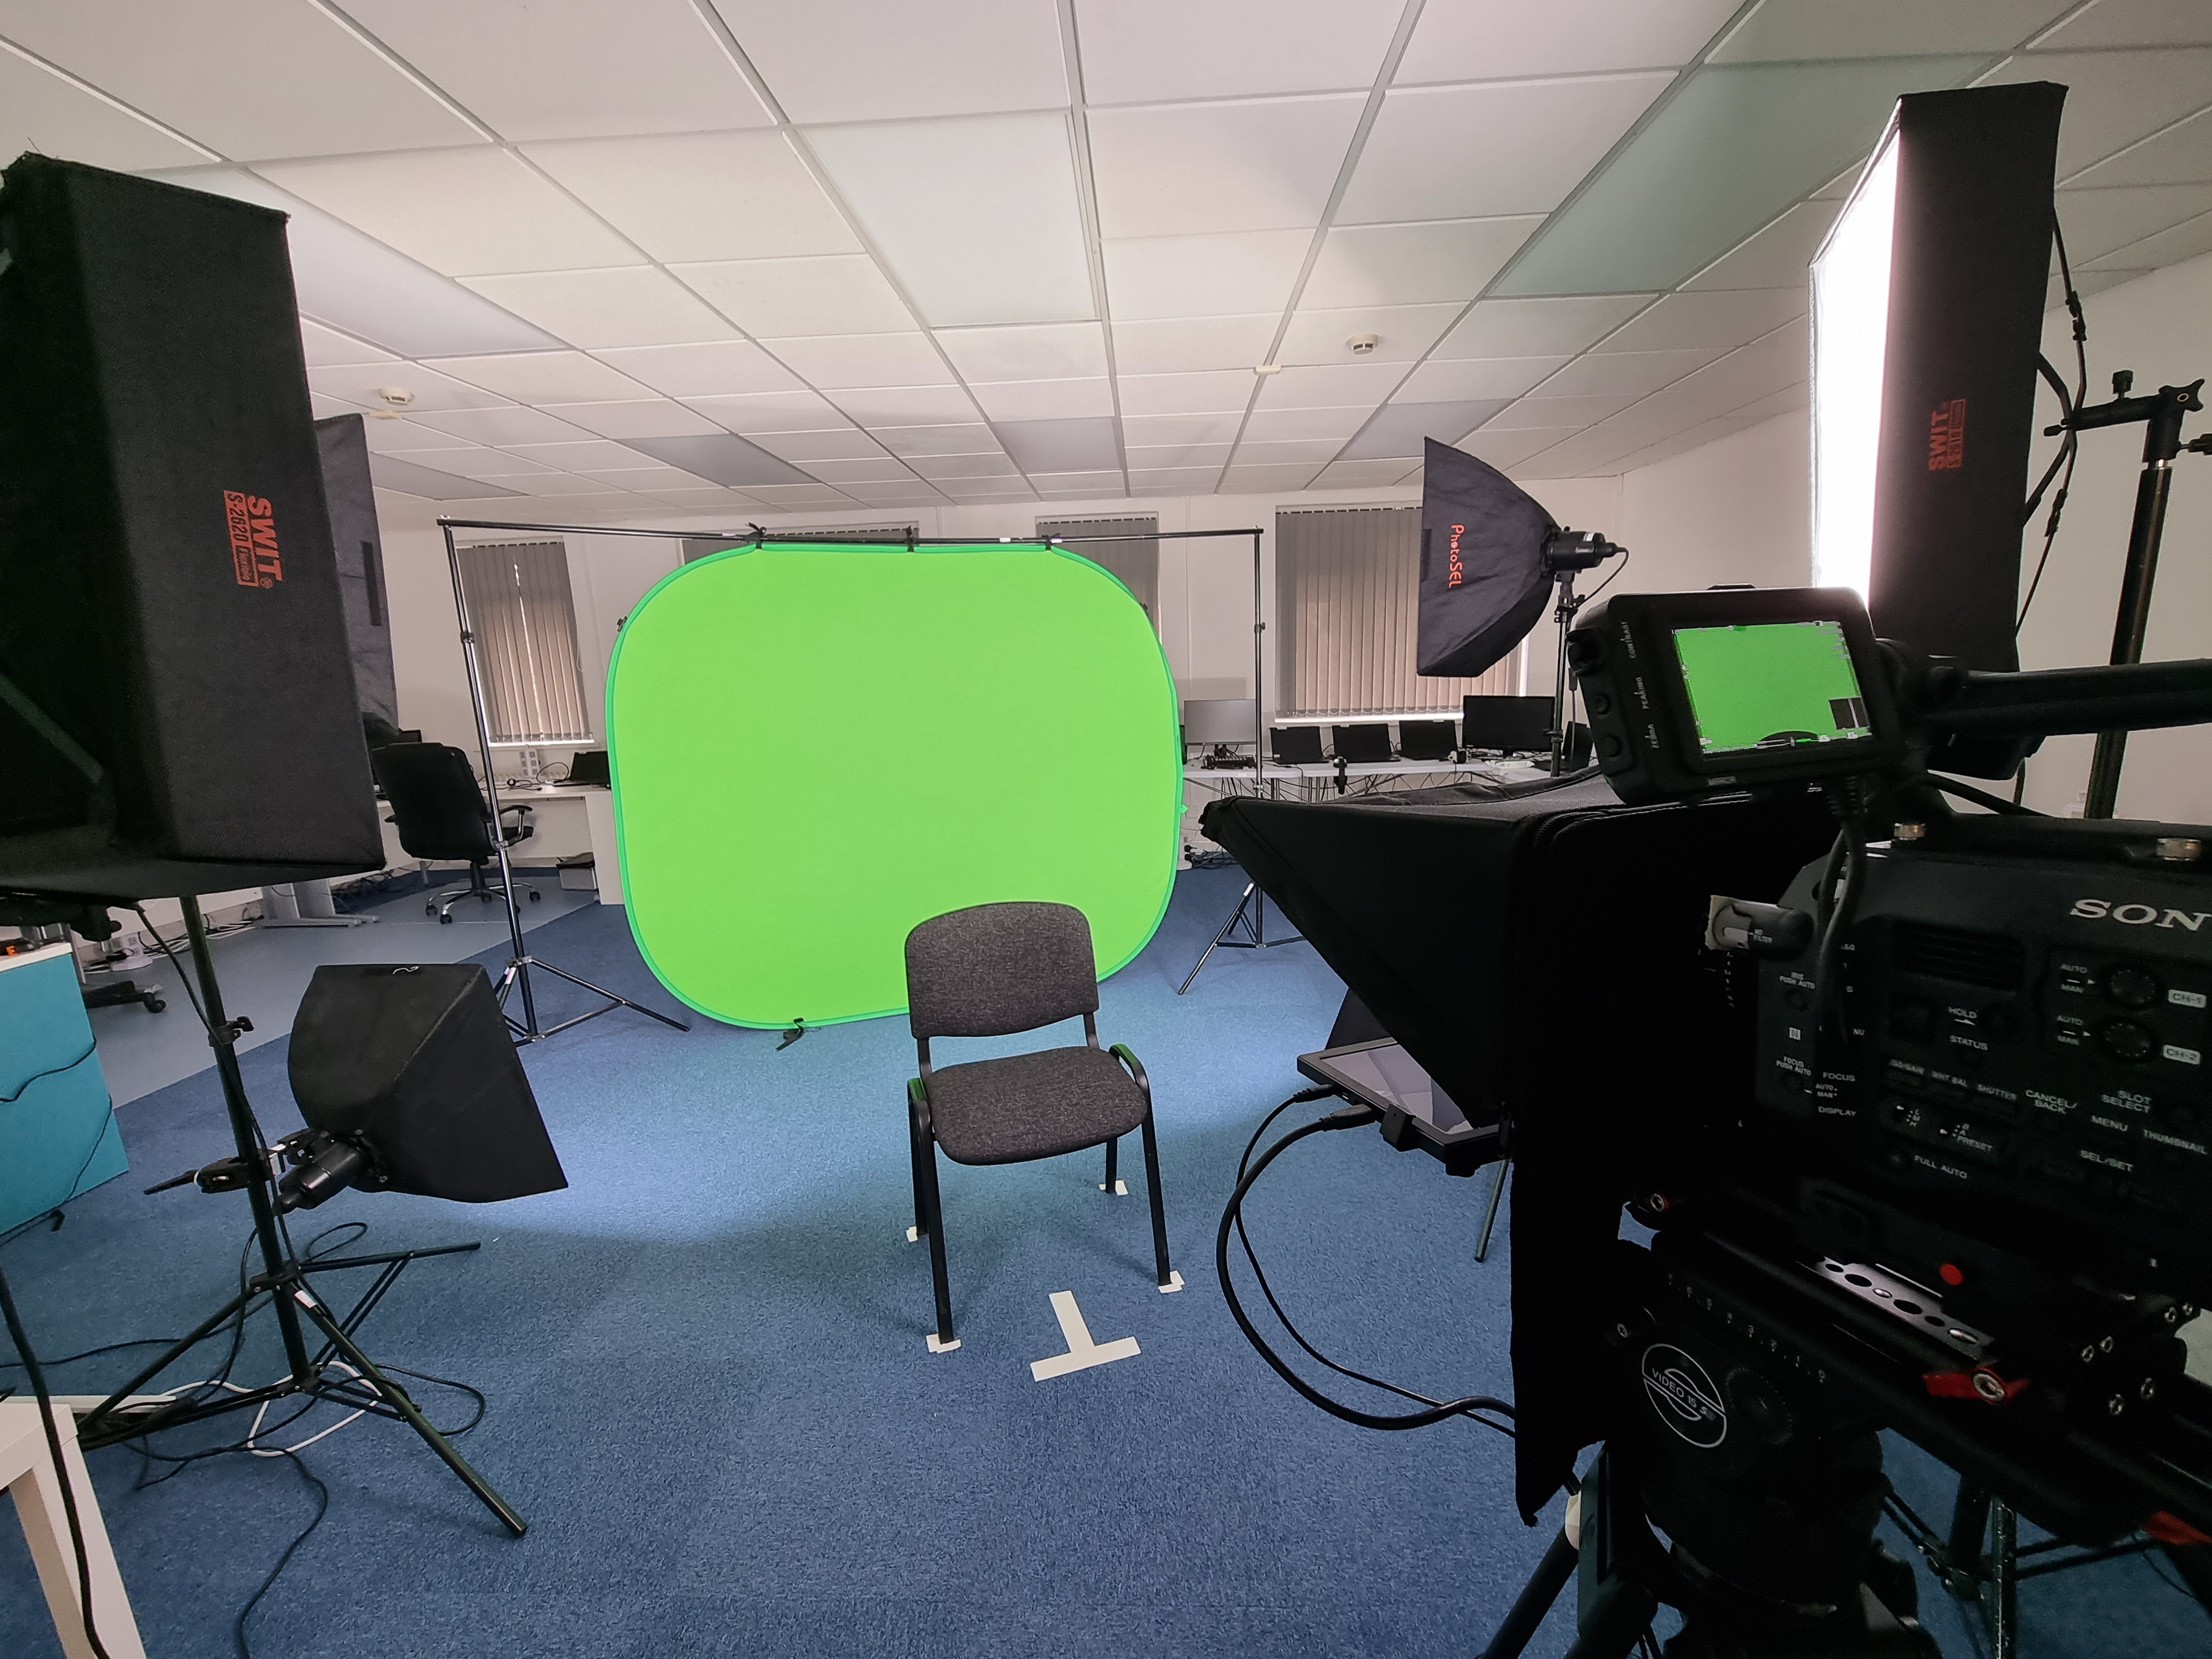 Green screen filming with remote production